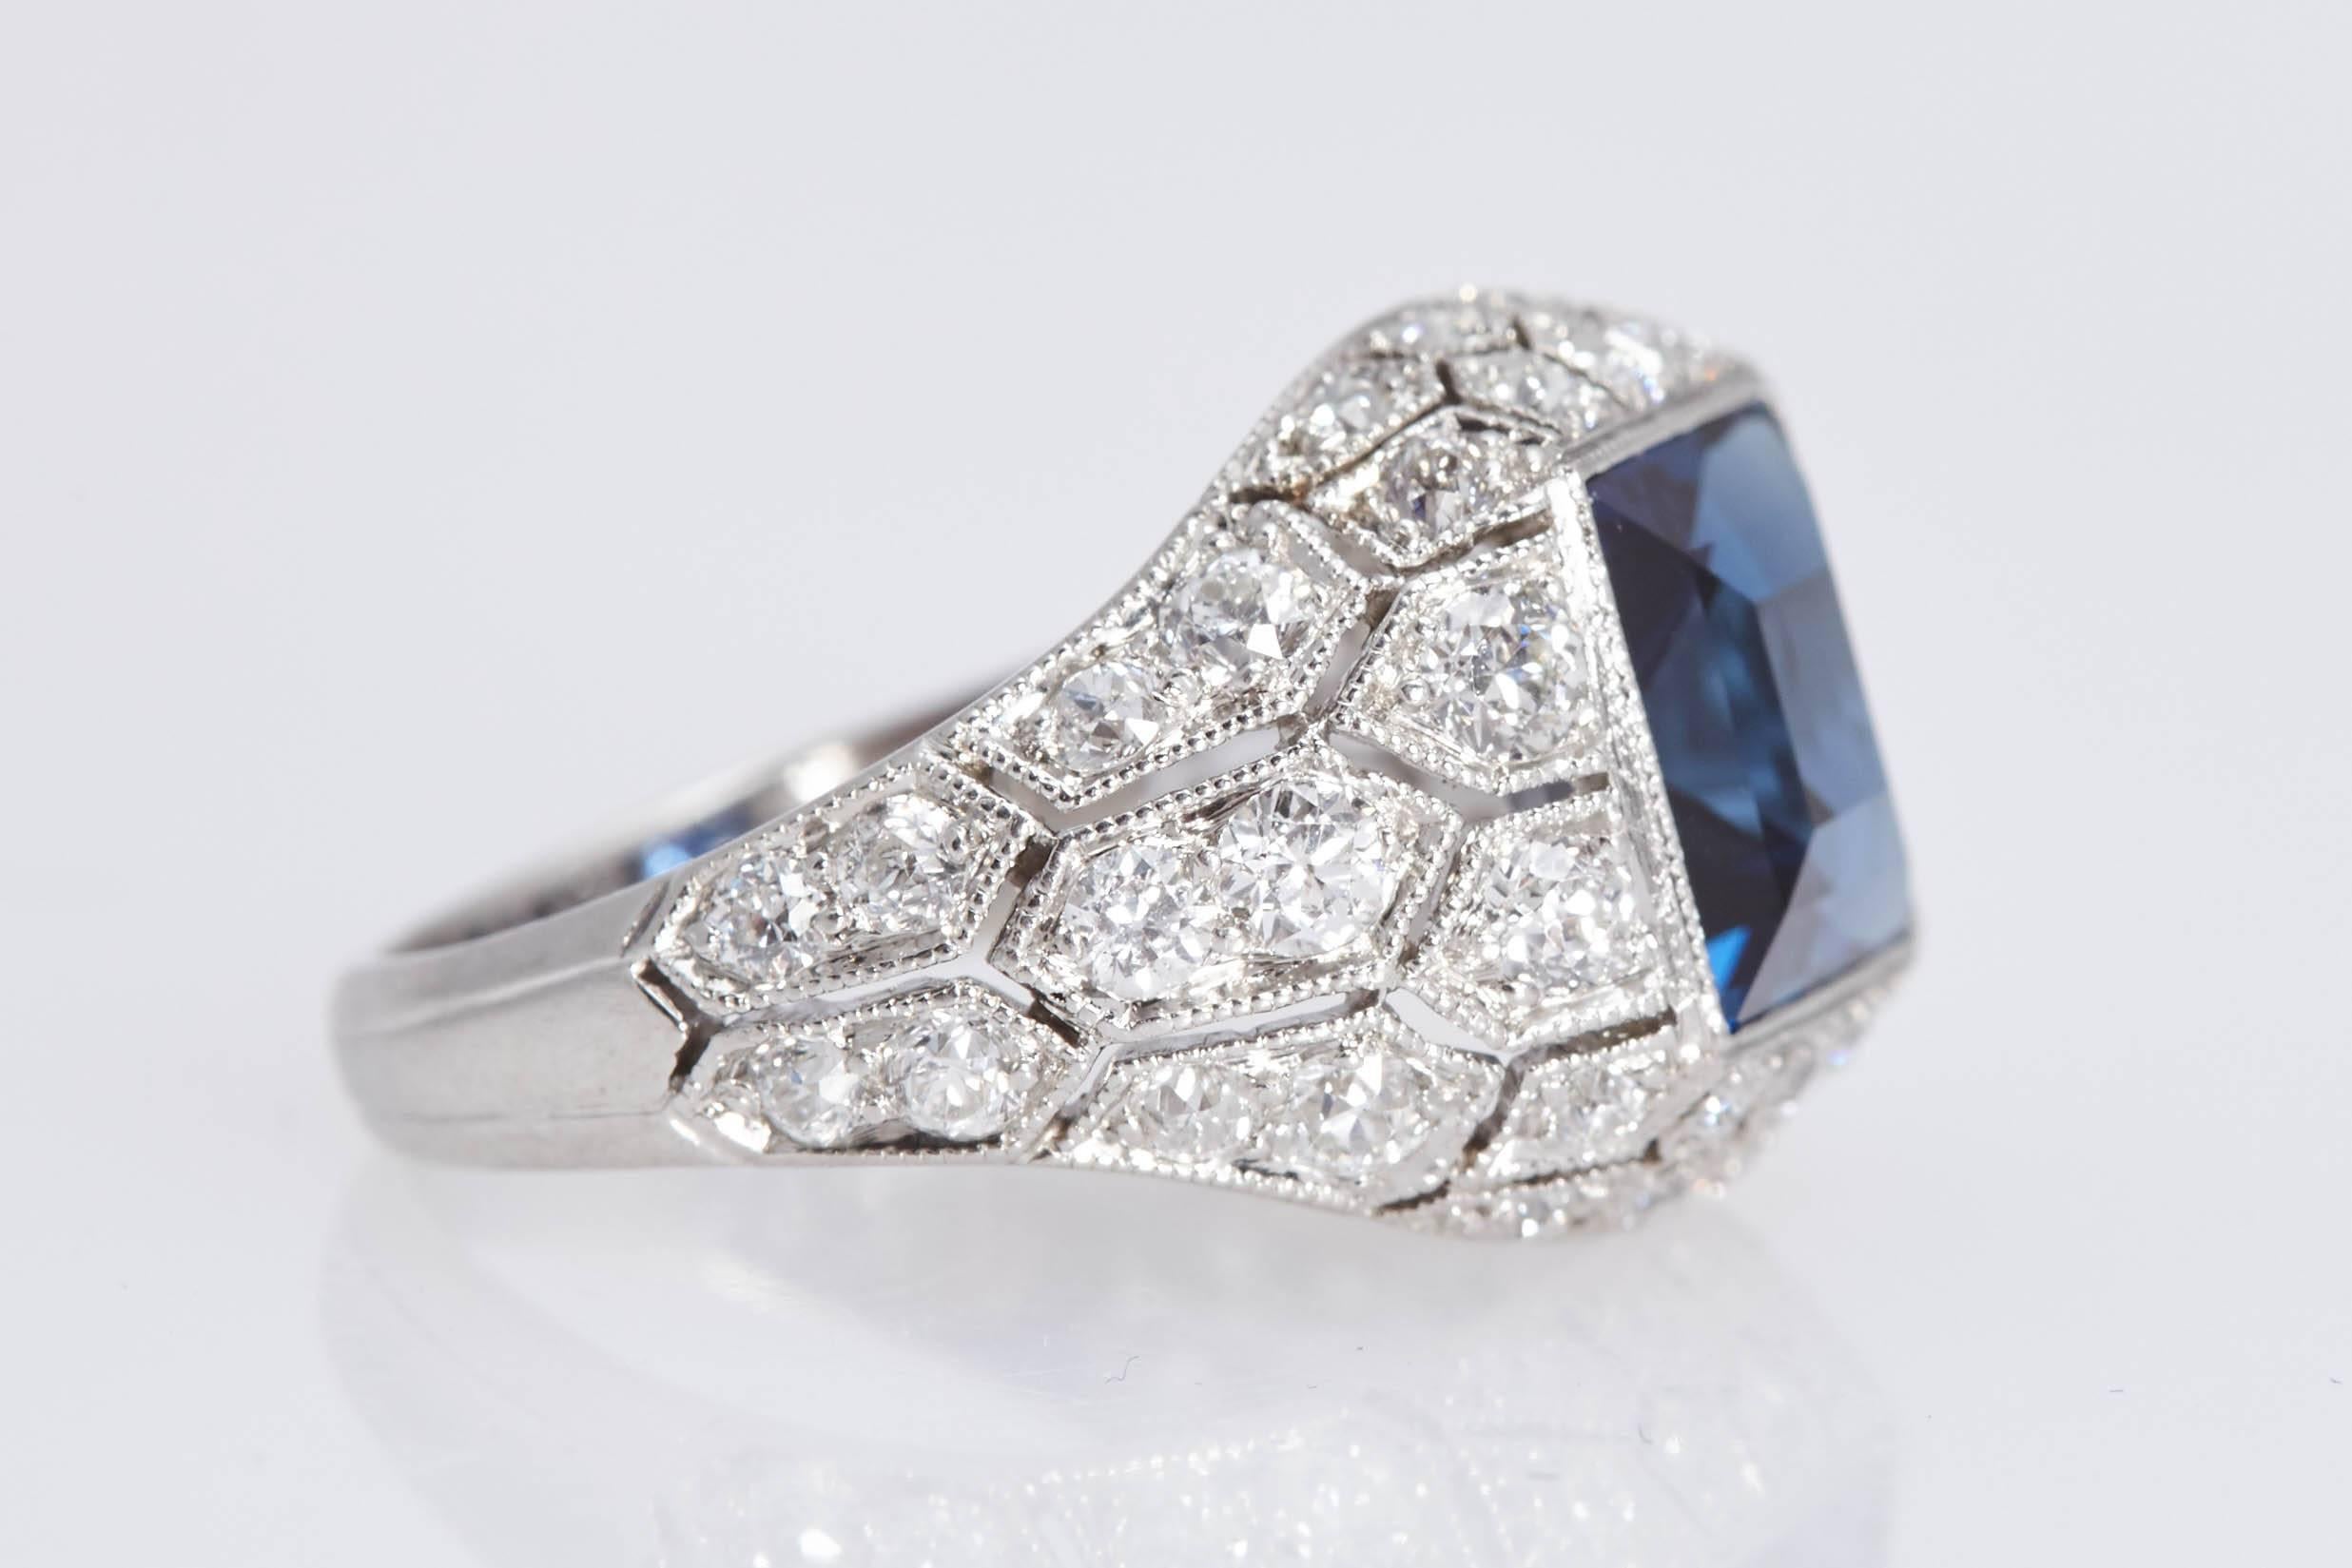 Beautiful Art Deco J.E. Caldwell Sapphire Diamond and Platinum ring. The center blue sapphire is a square shape weighing 2.89 carats and has a certificate from the American Gemological Laboratories. The sapphire is set in a ring with intricate